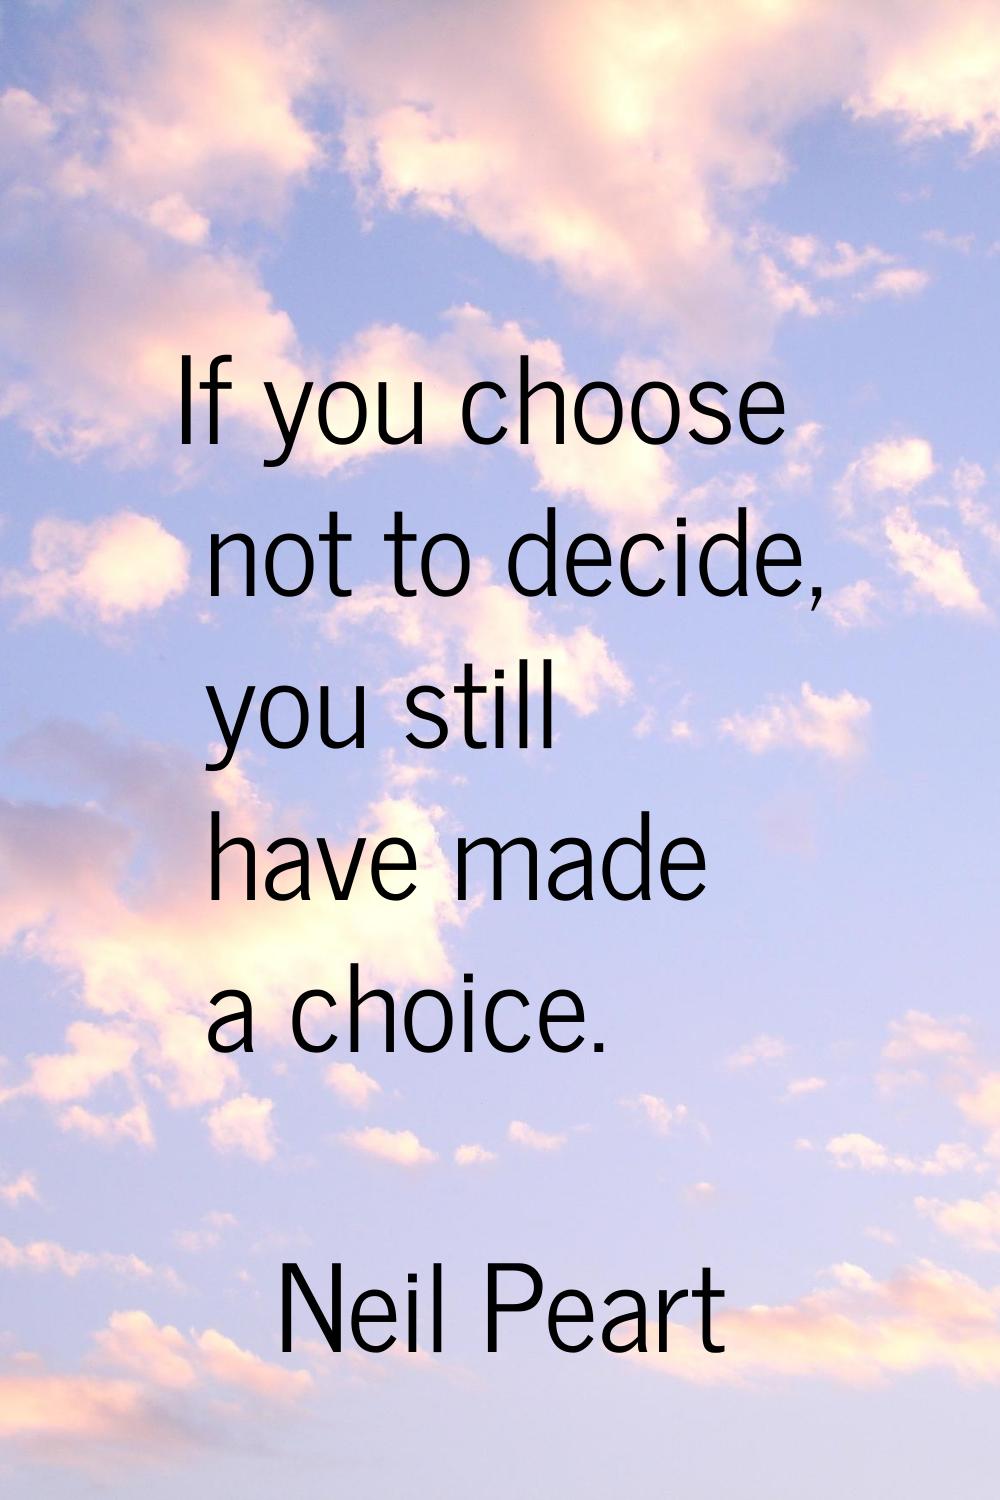 If you choose not to decide, you still have made a choice.